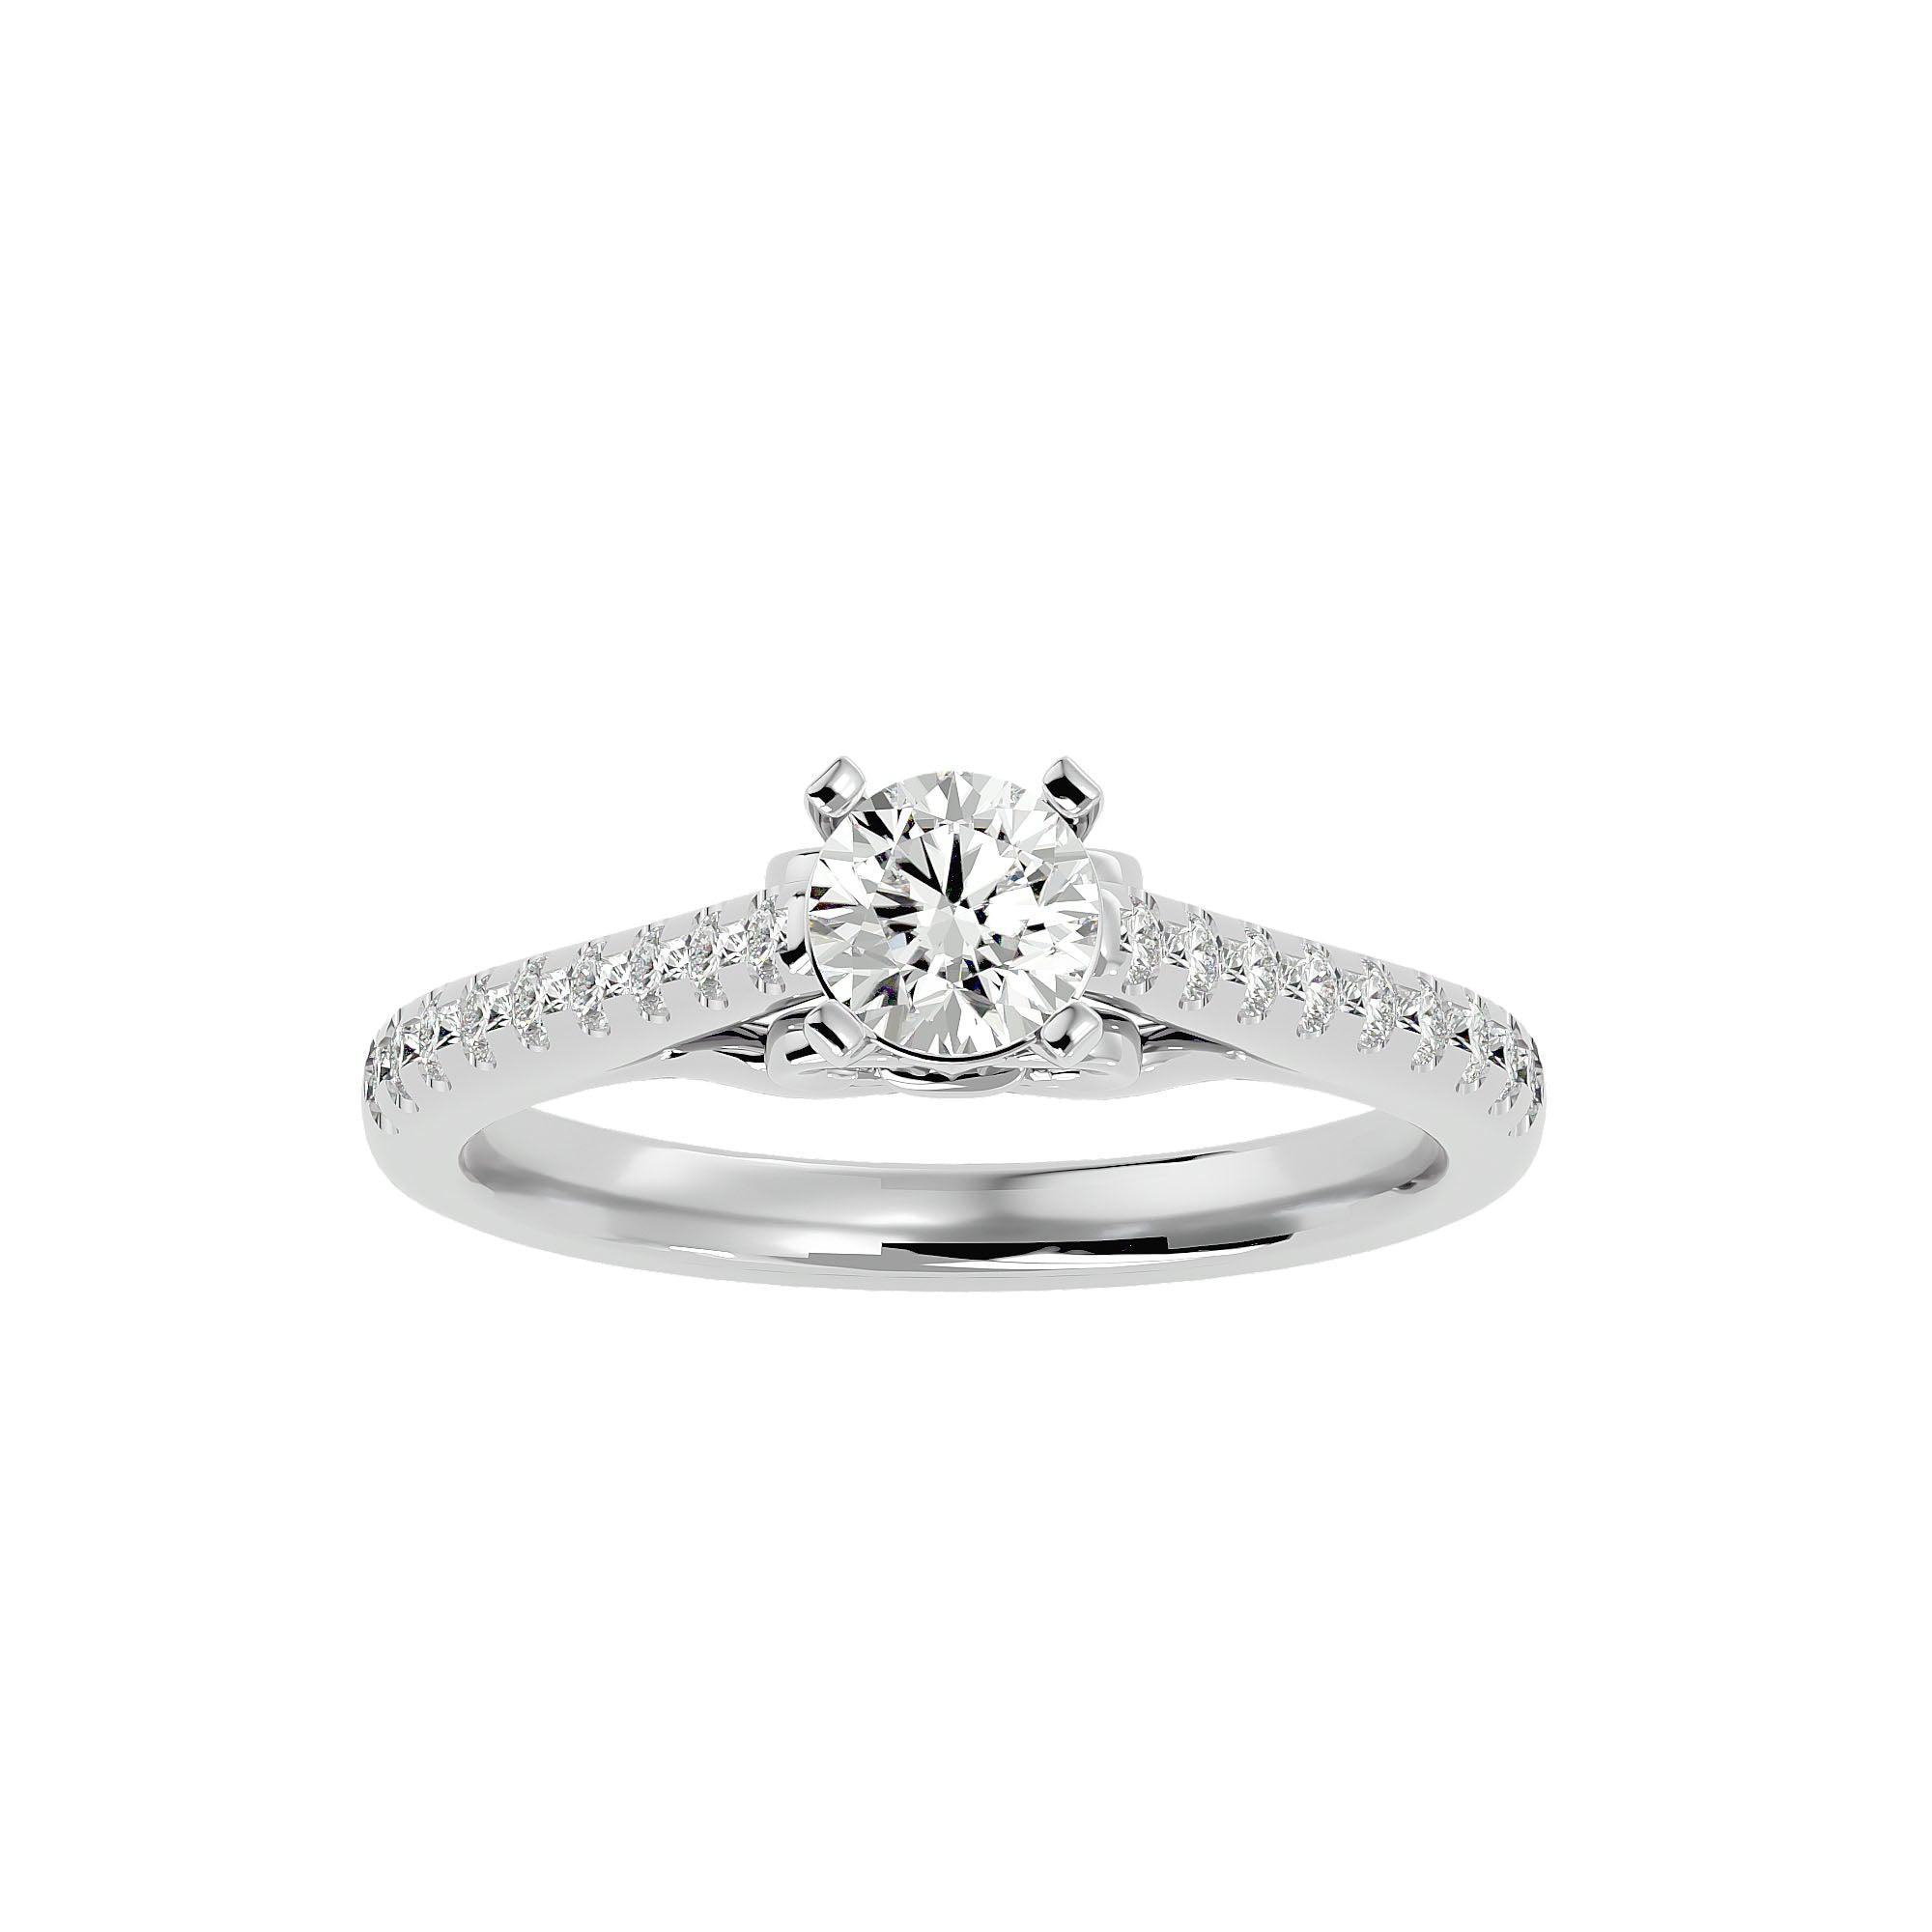 HOH Elise Diamond Solitaire Ring